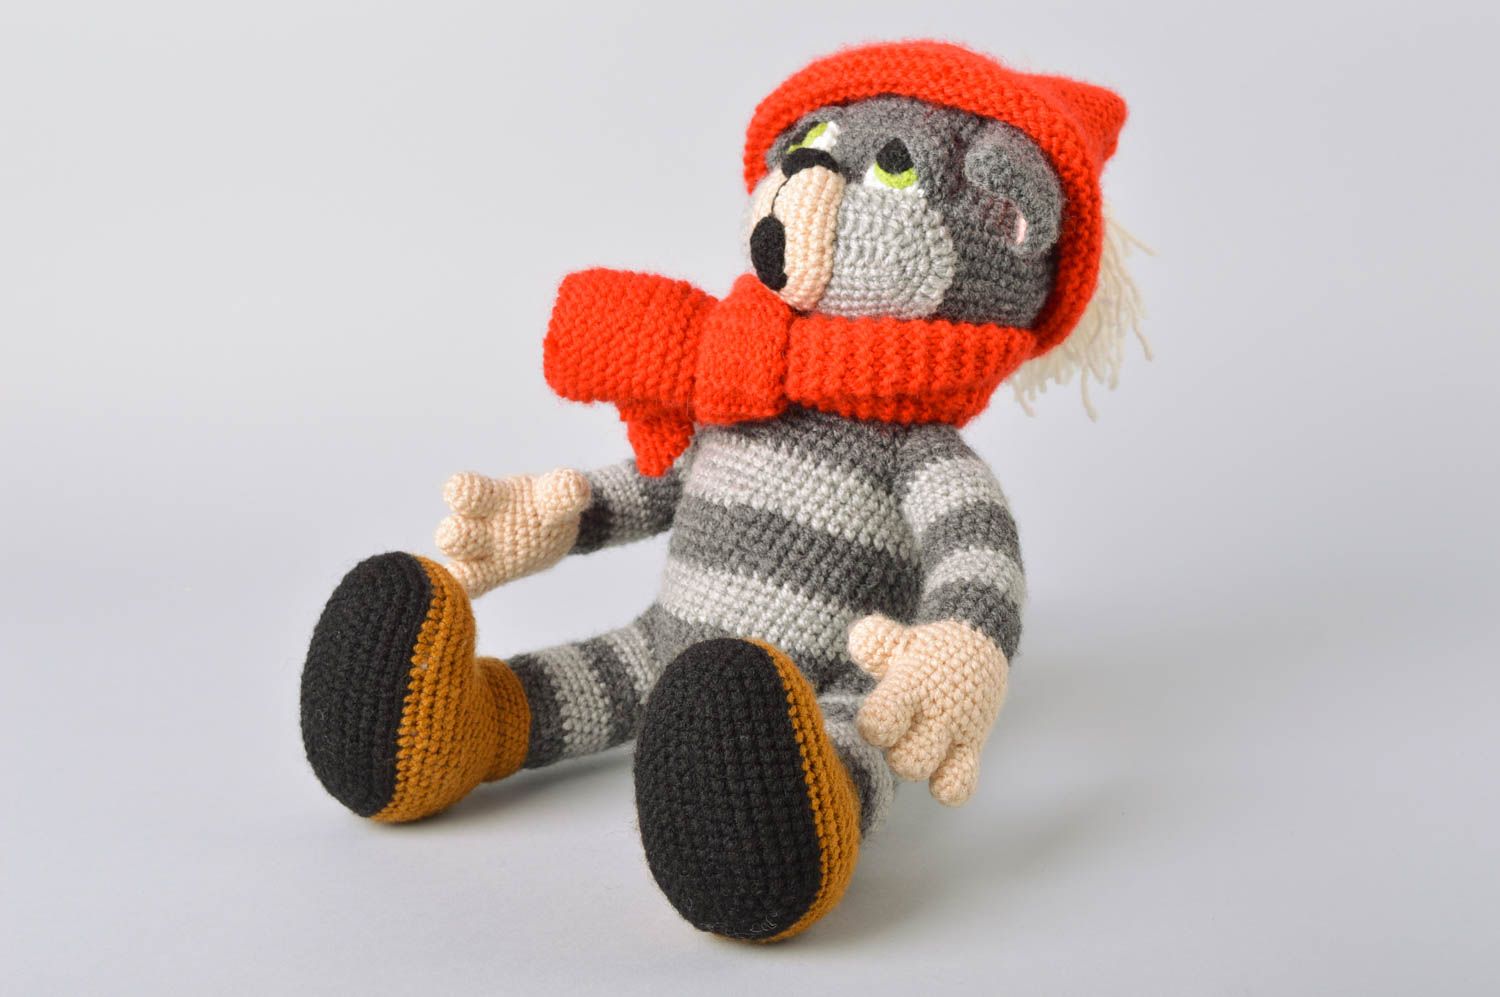 Handmade designer crochet toy striped gray cat in red hat and scarf photo 2